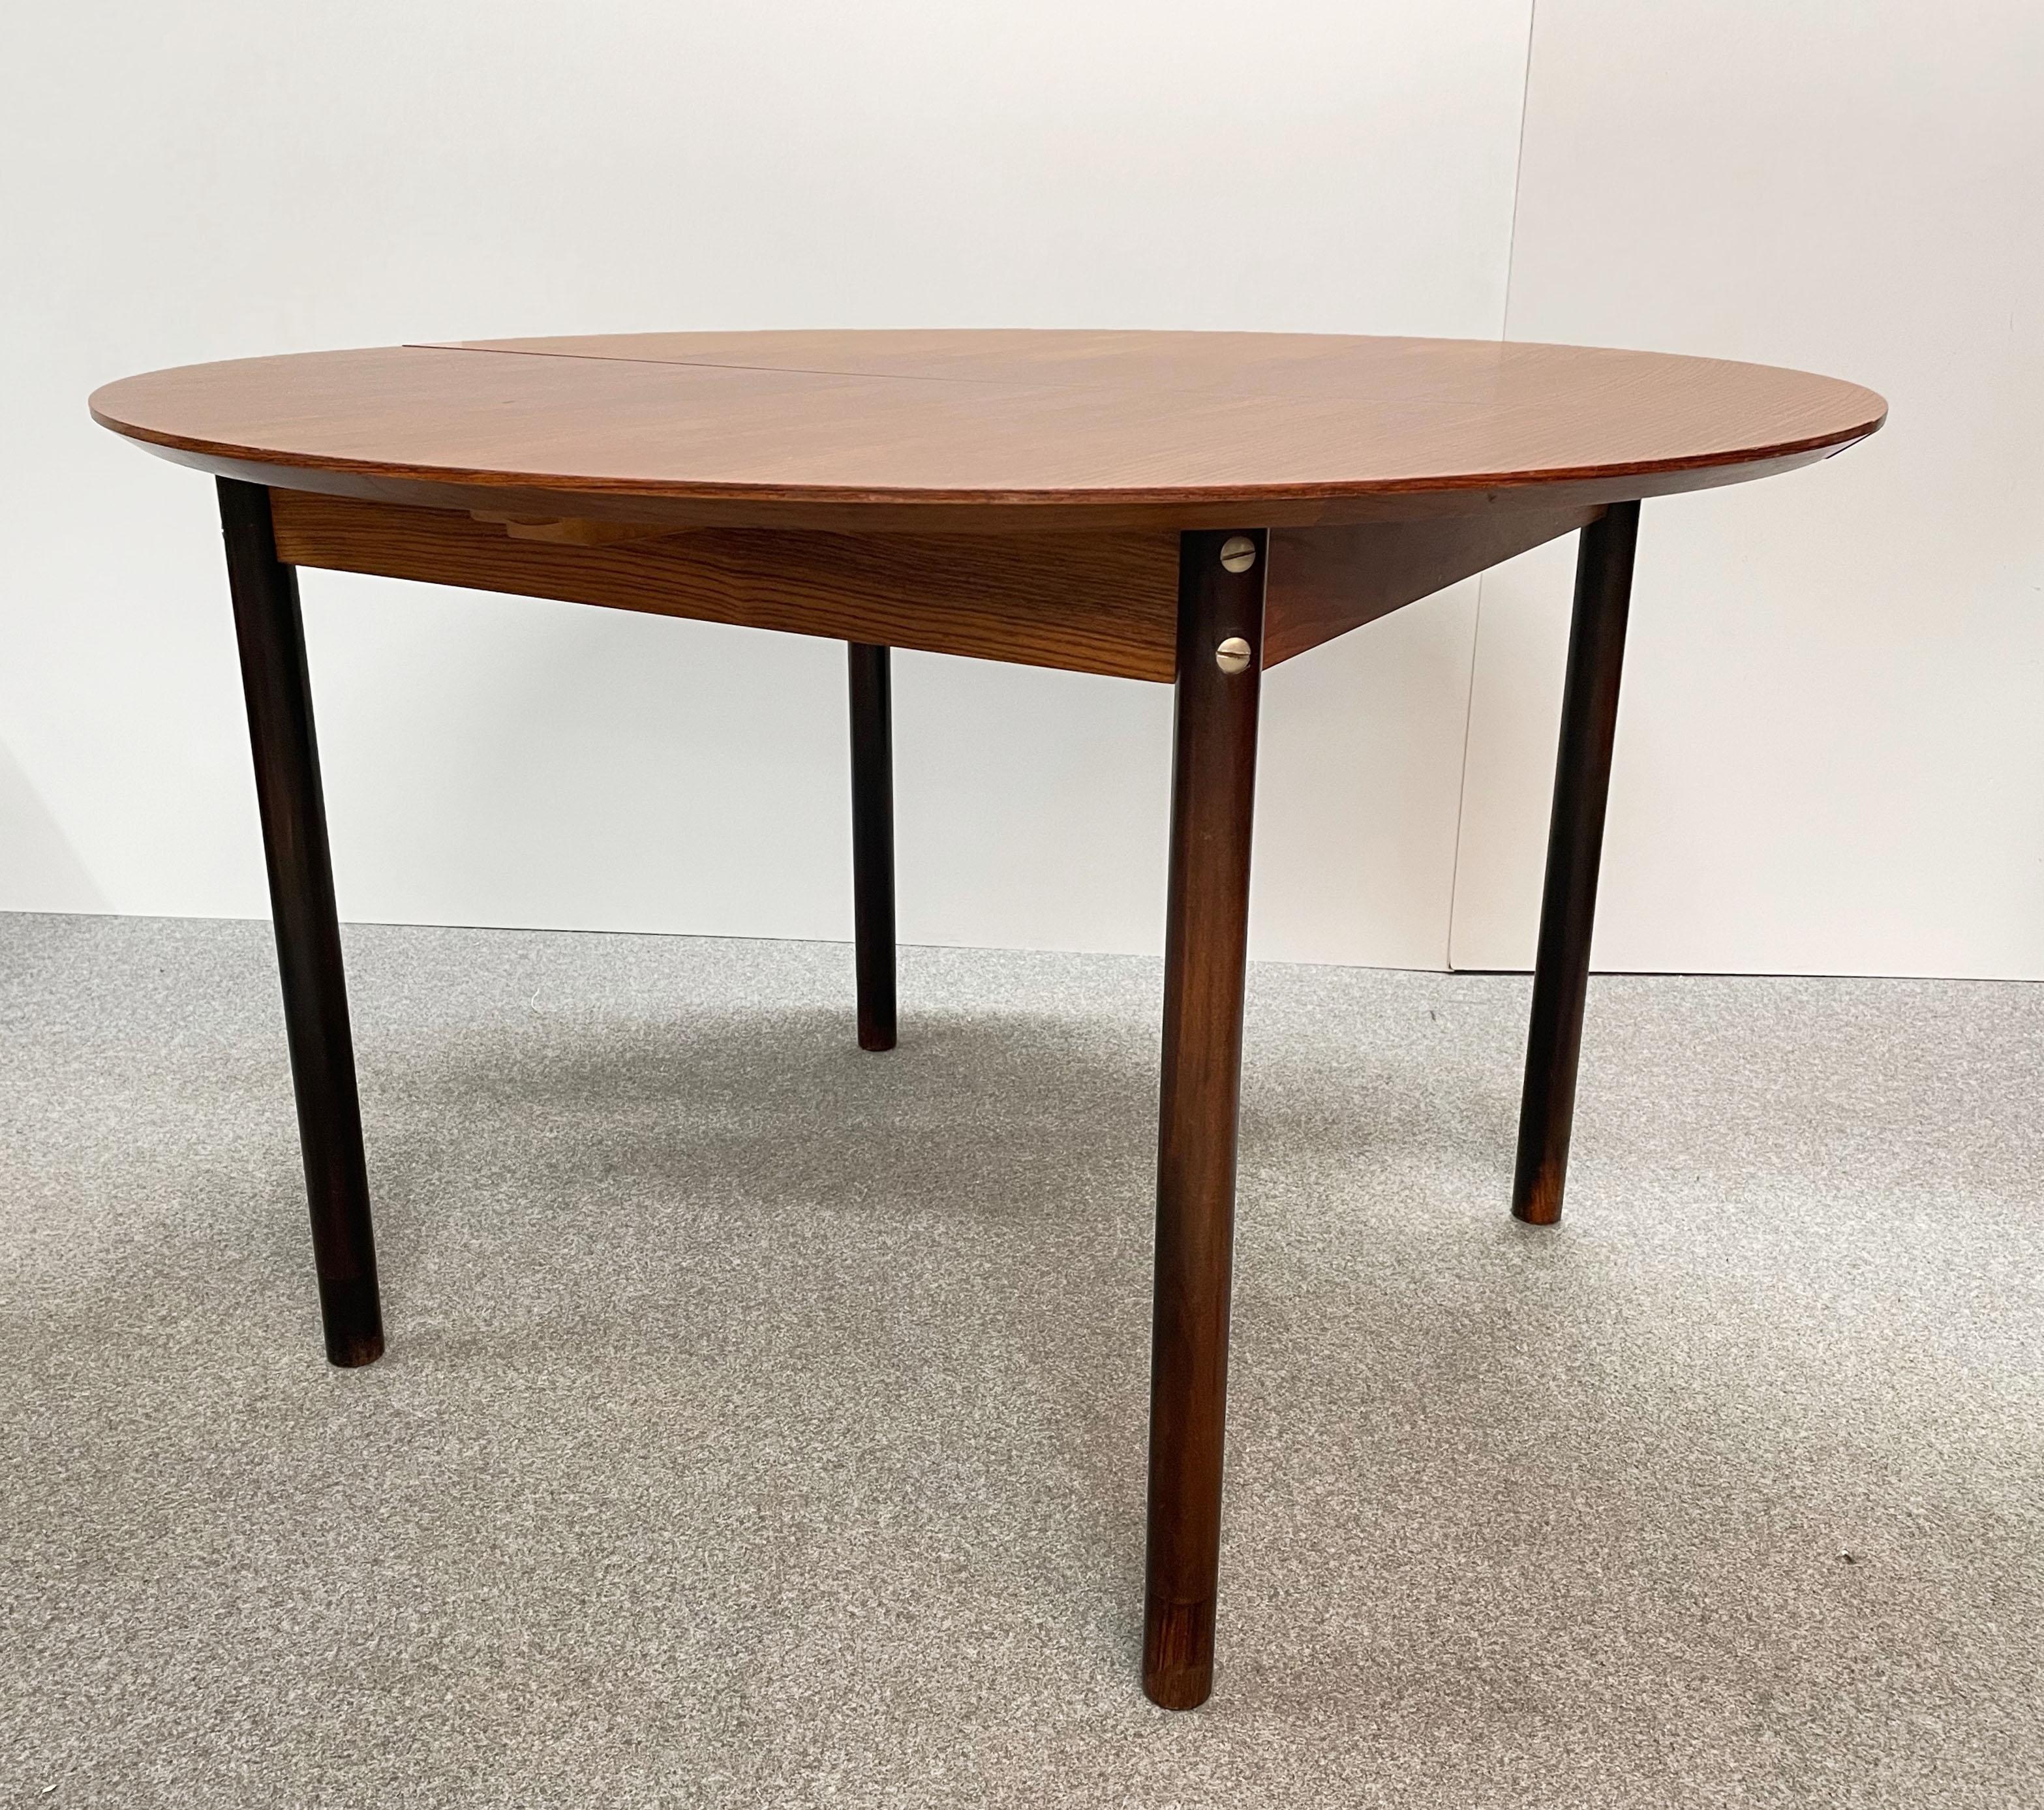 Amazing midcentury extendable teak Italian dining table. This wonderful piece was designed in Italy during the 1970s.

This gorgeous table is fantastic as it can be extended and the extension has grains that are perpendicular to the round